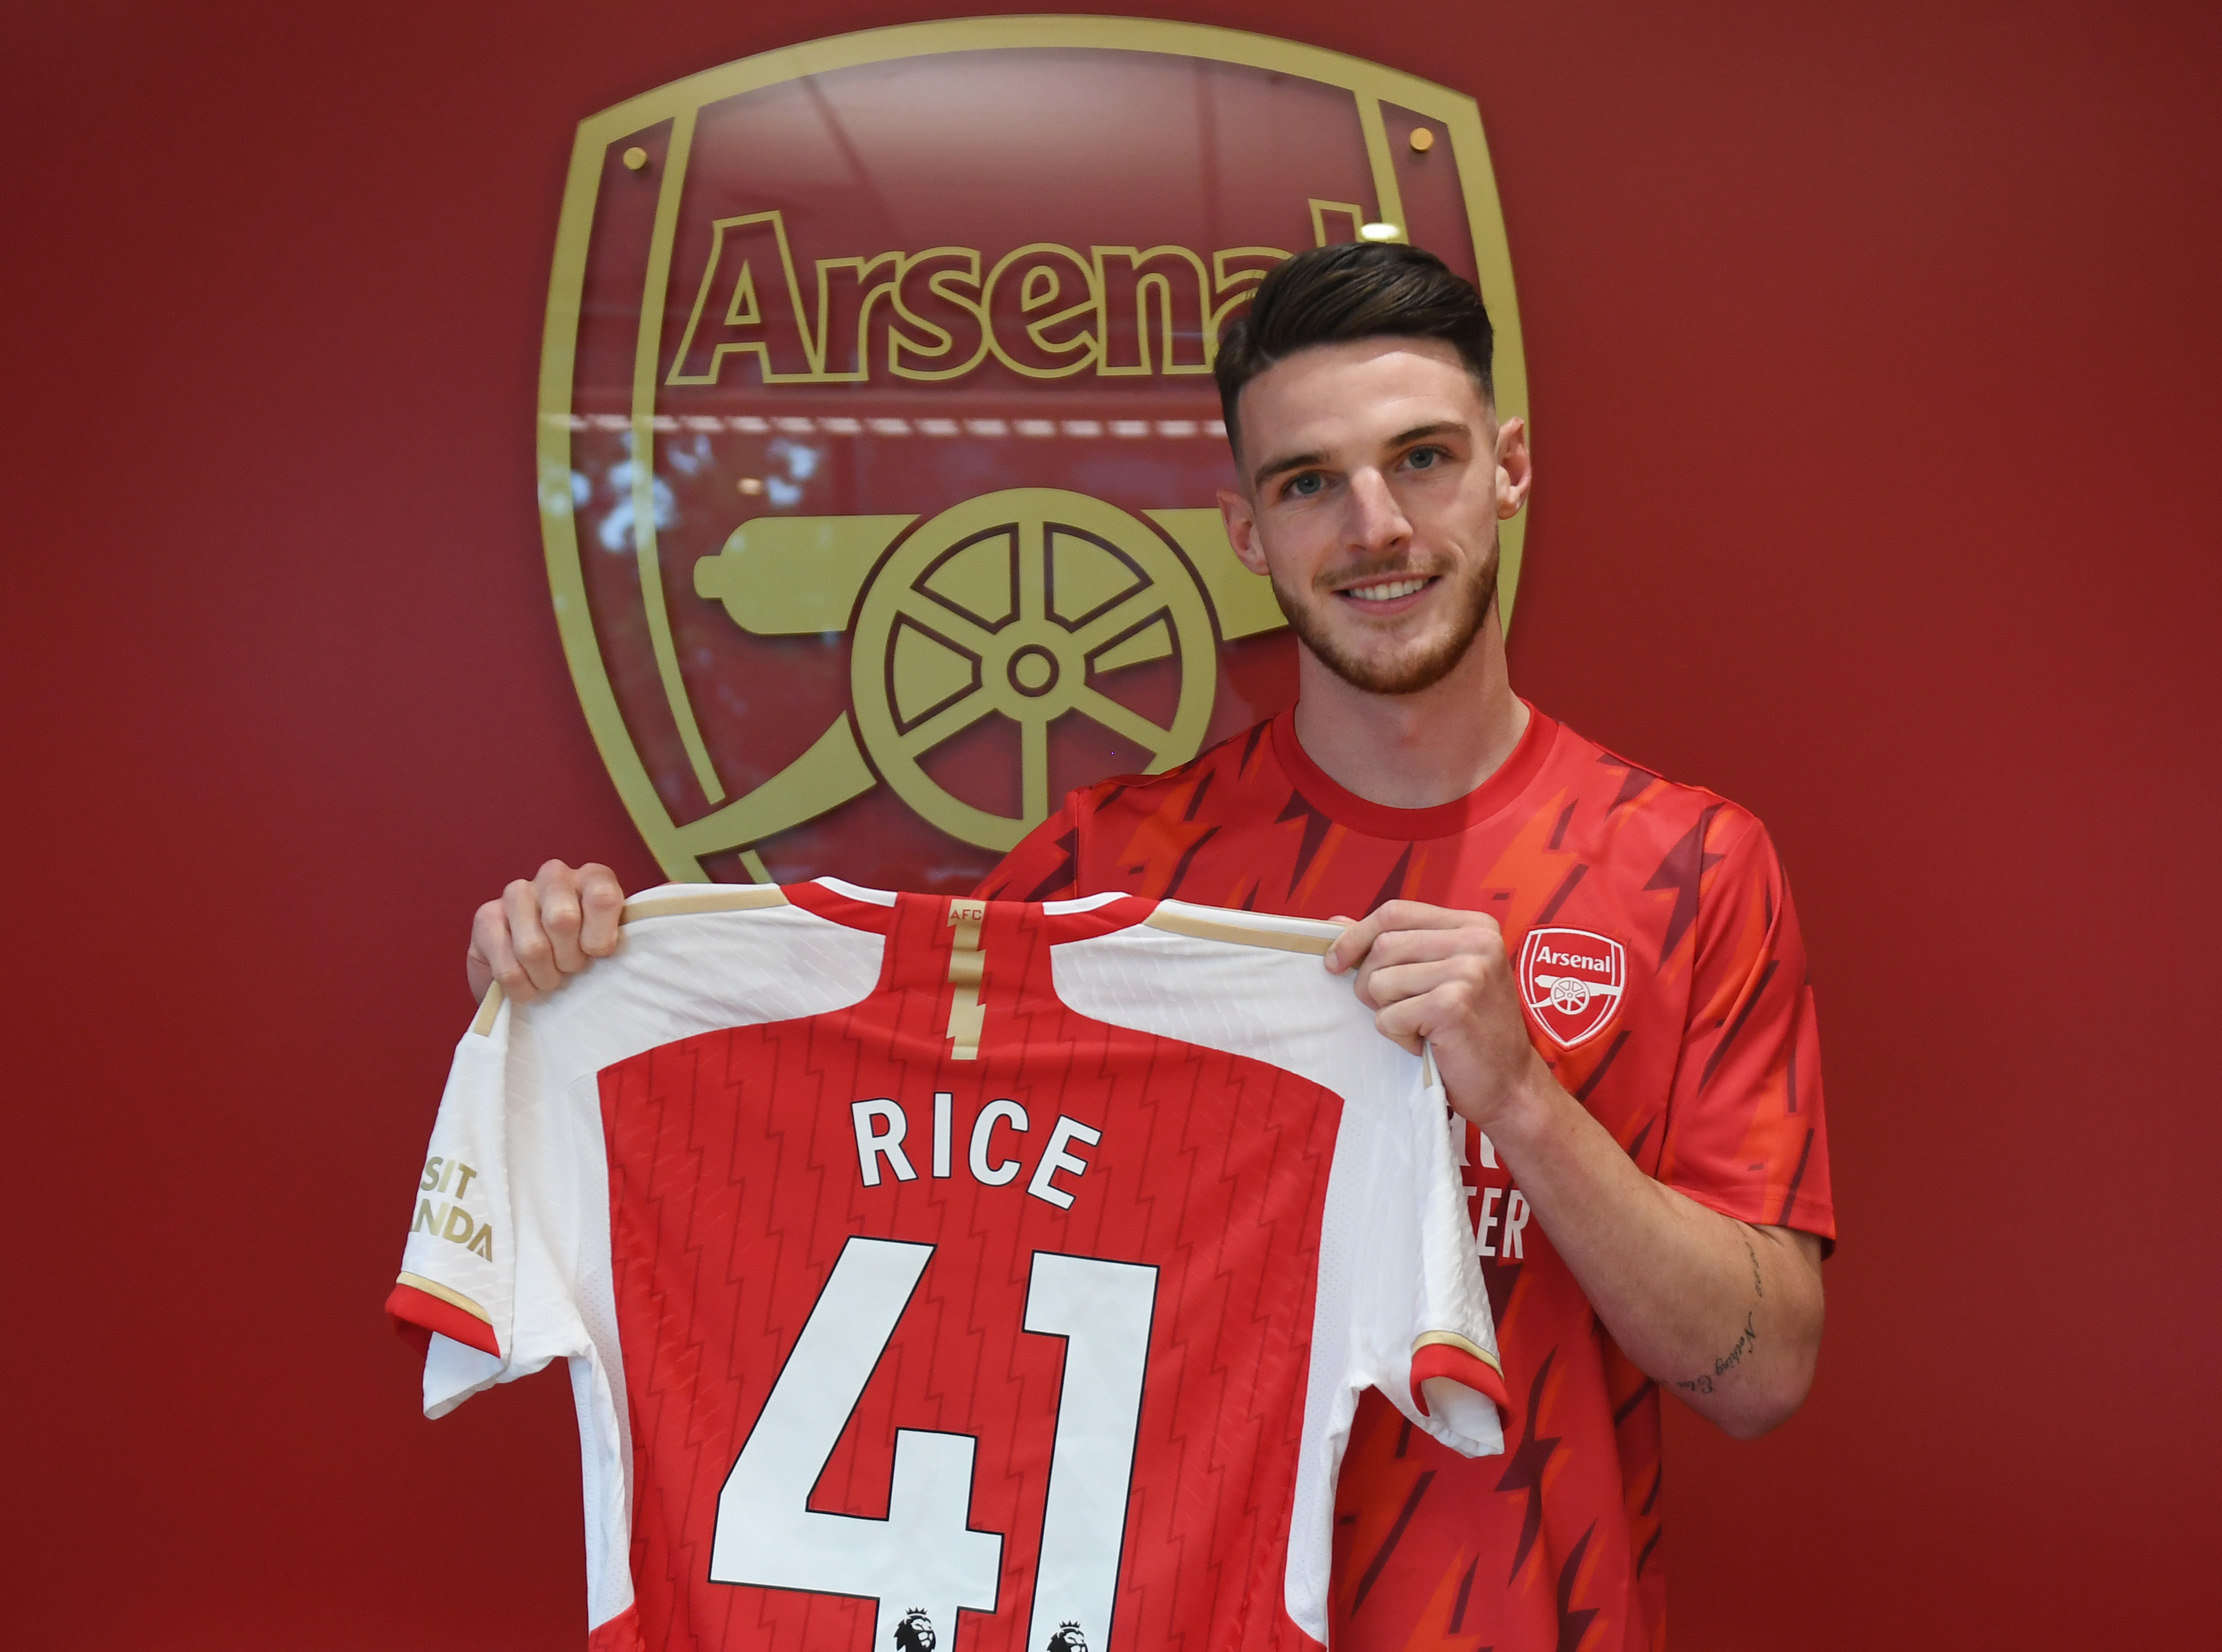  Declan Rice is pictured holding a jersey with his name and the number 41 on it, while standing in front of the Arsenal logo.